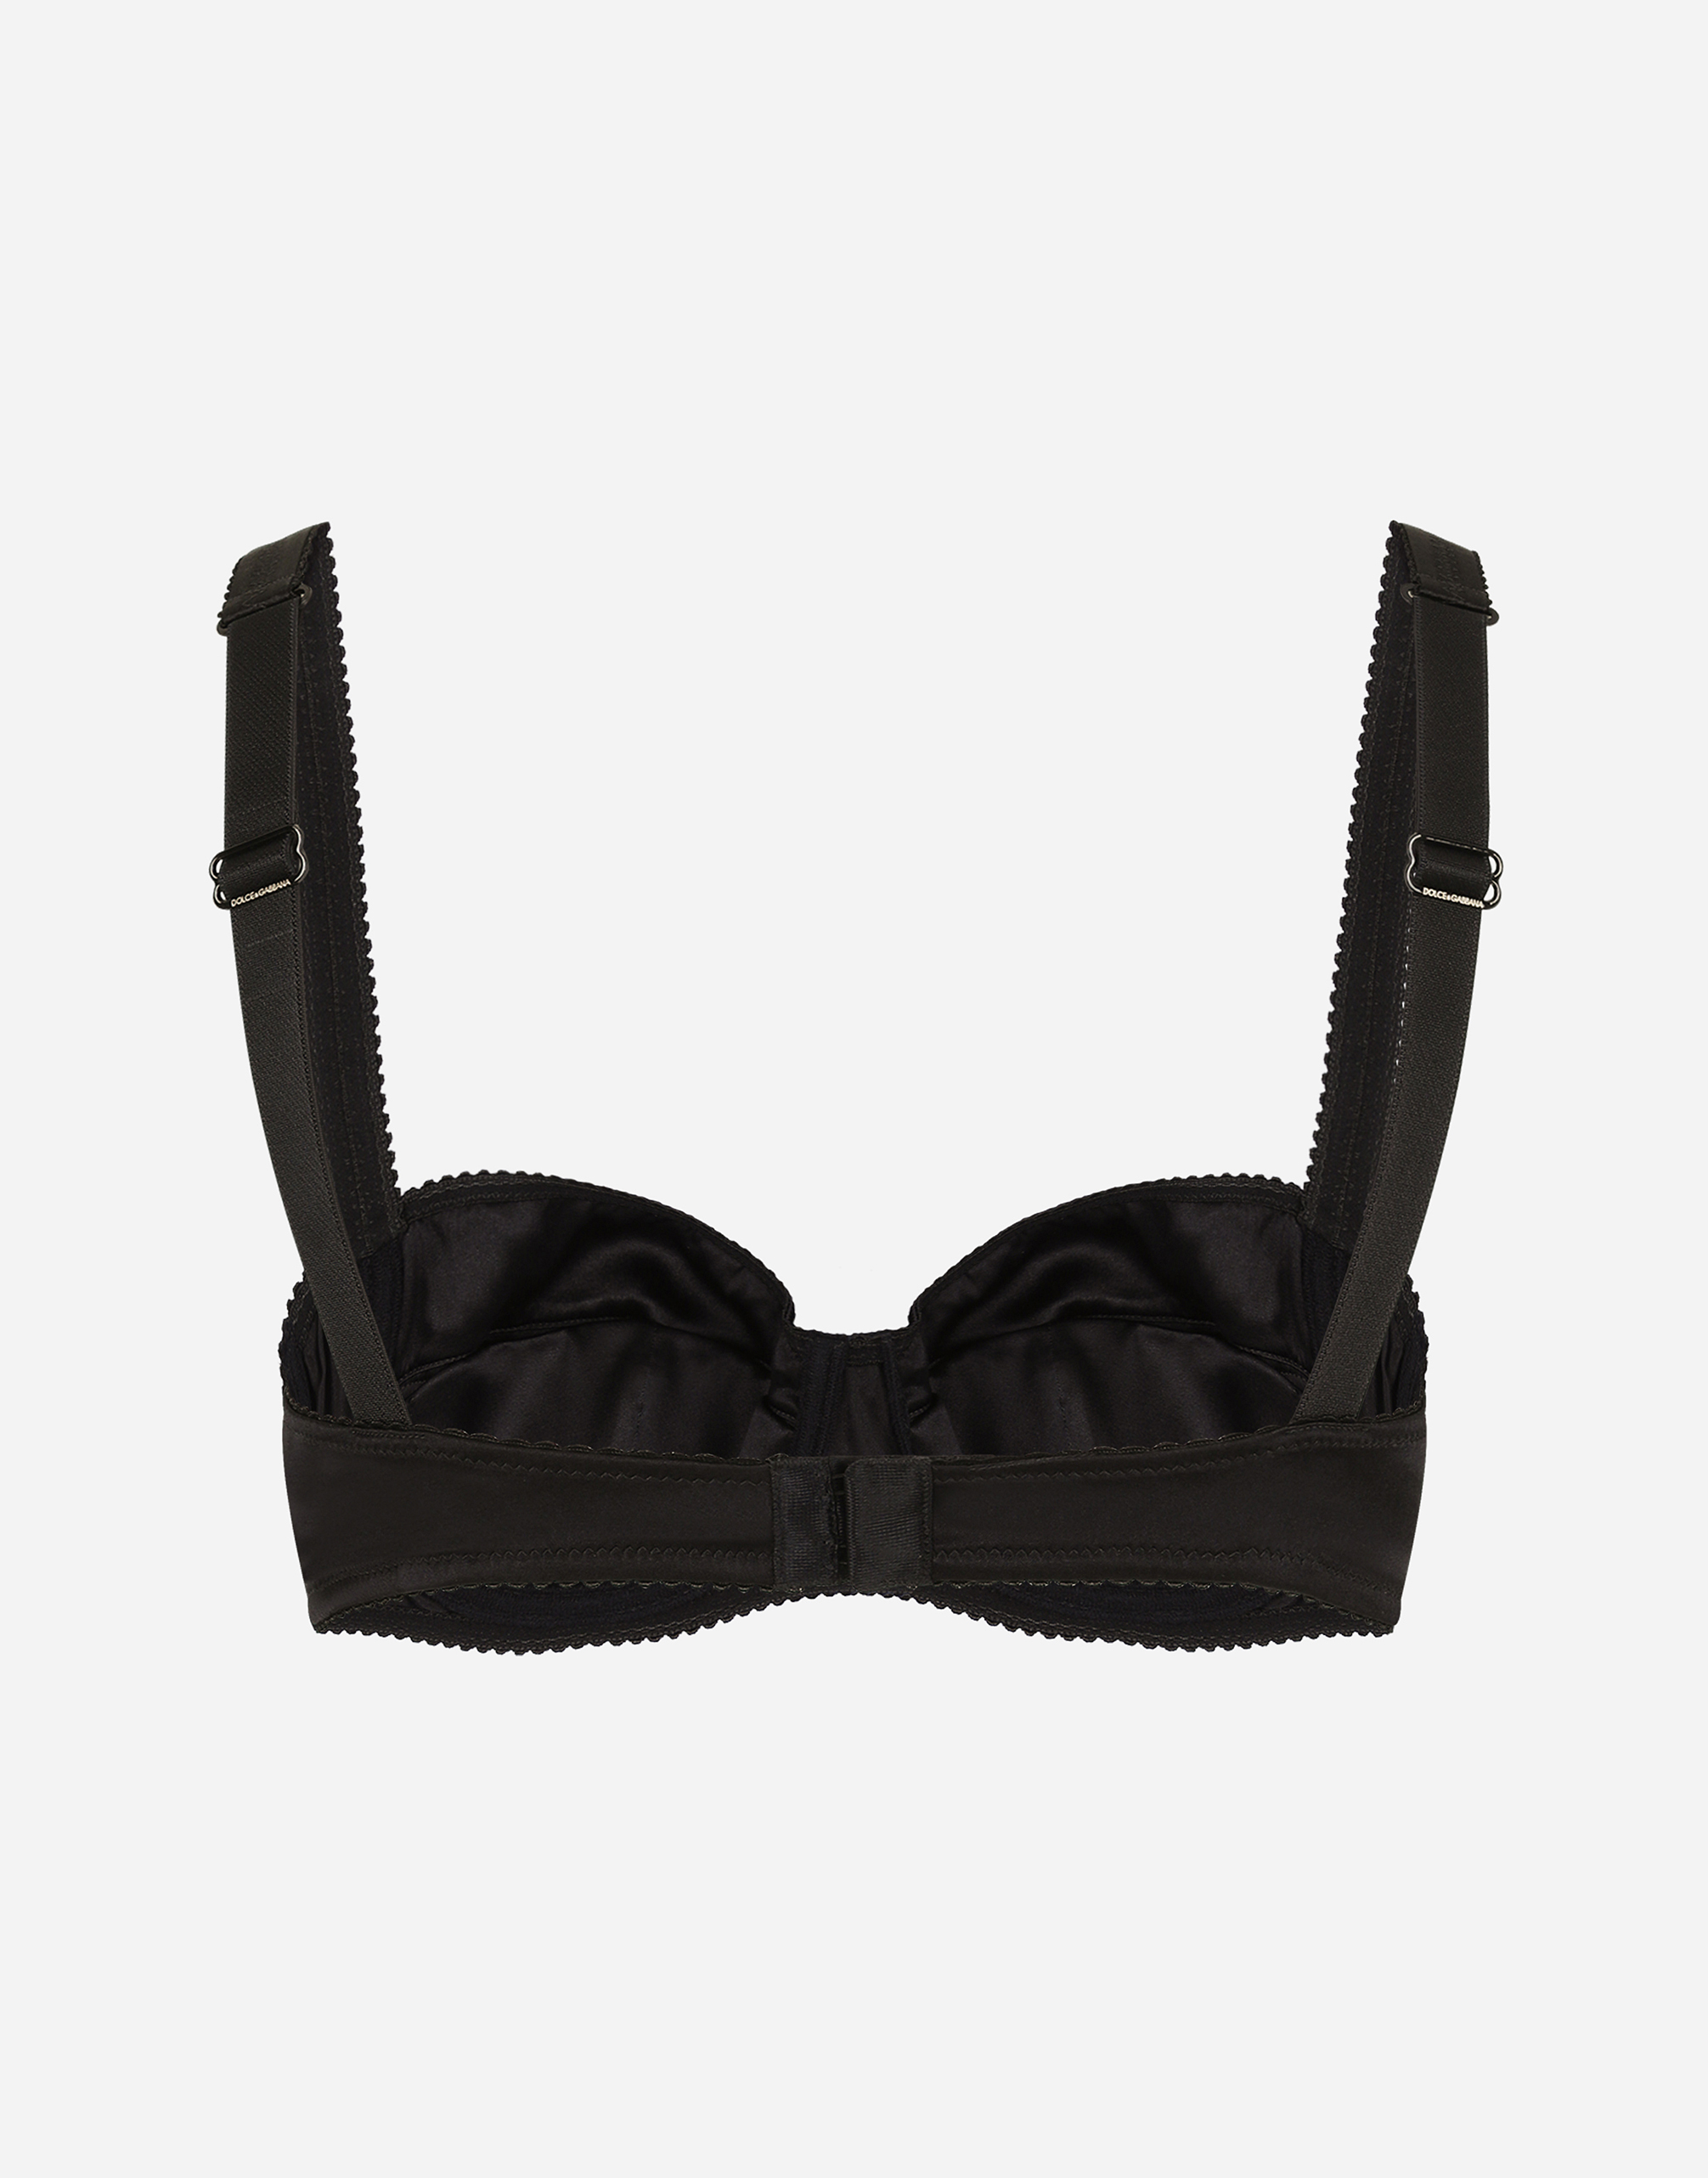 Satin balconette bra with lace detailing in BLACK for